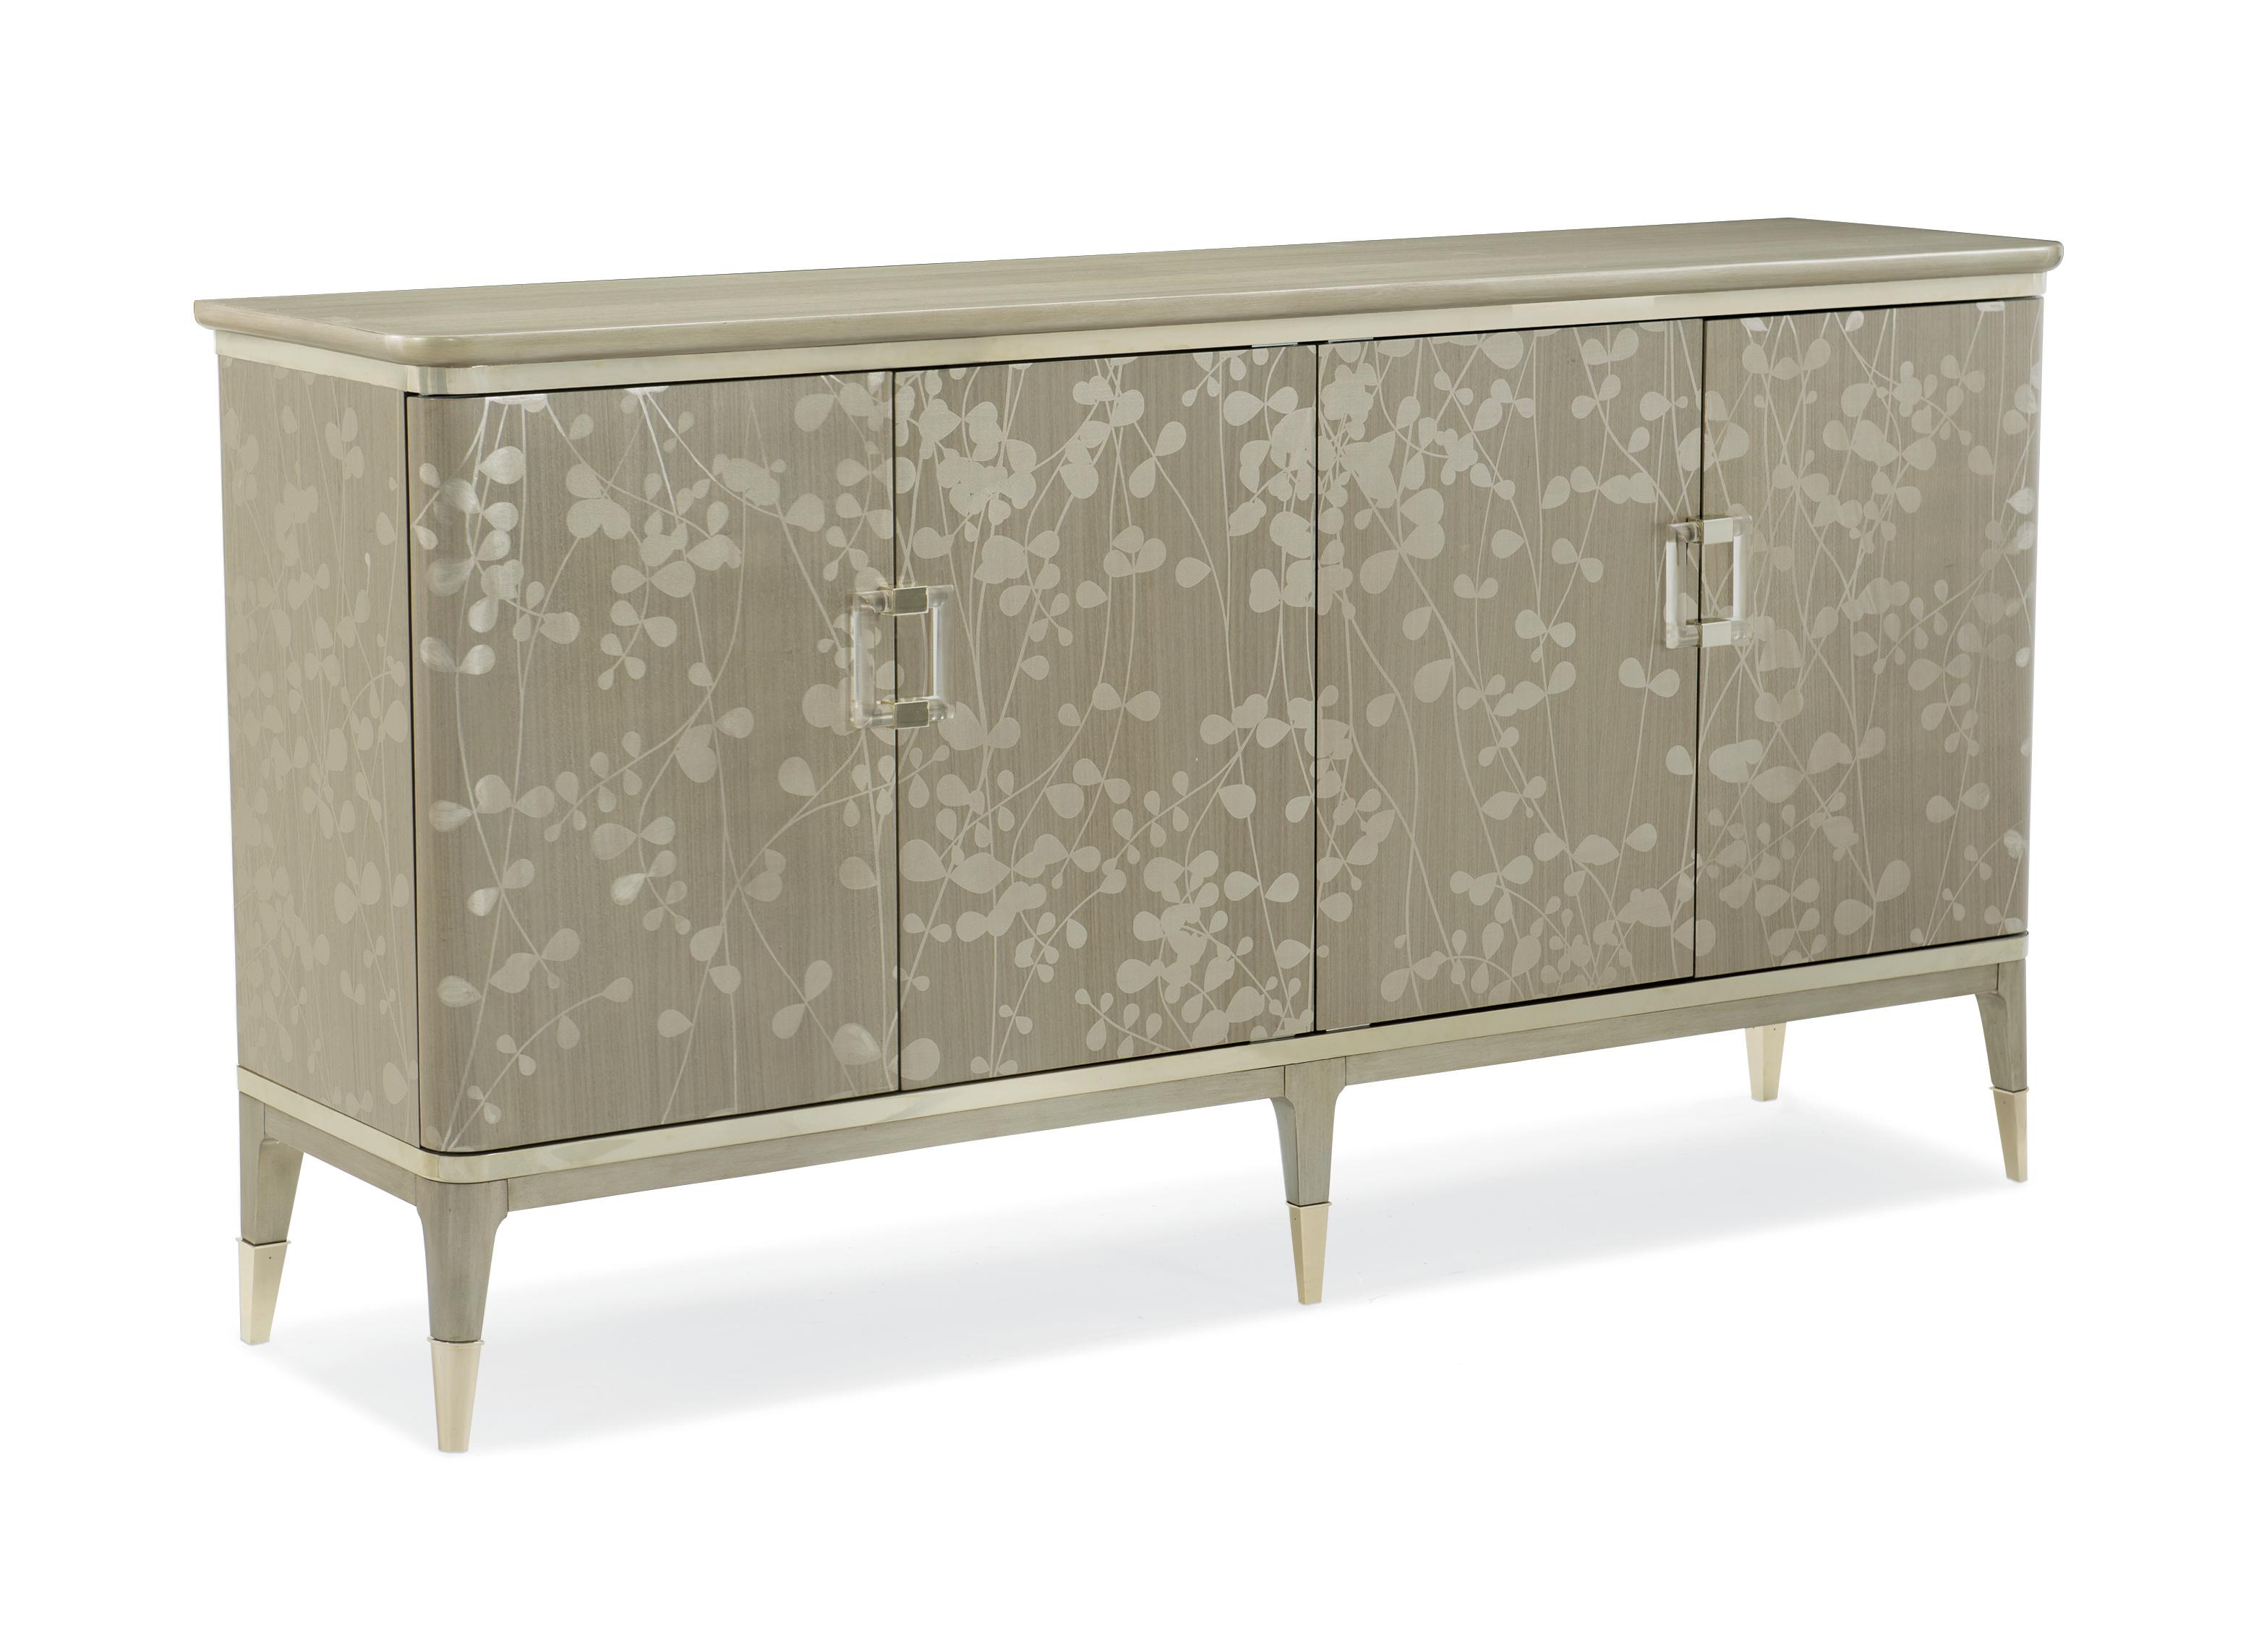 Contemporary Buffet A SHIMMER OF LIGHT CLA-419-462 in Champagne 